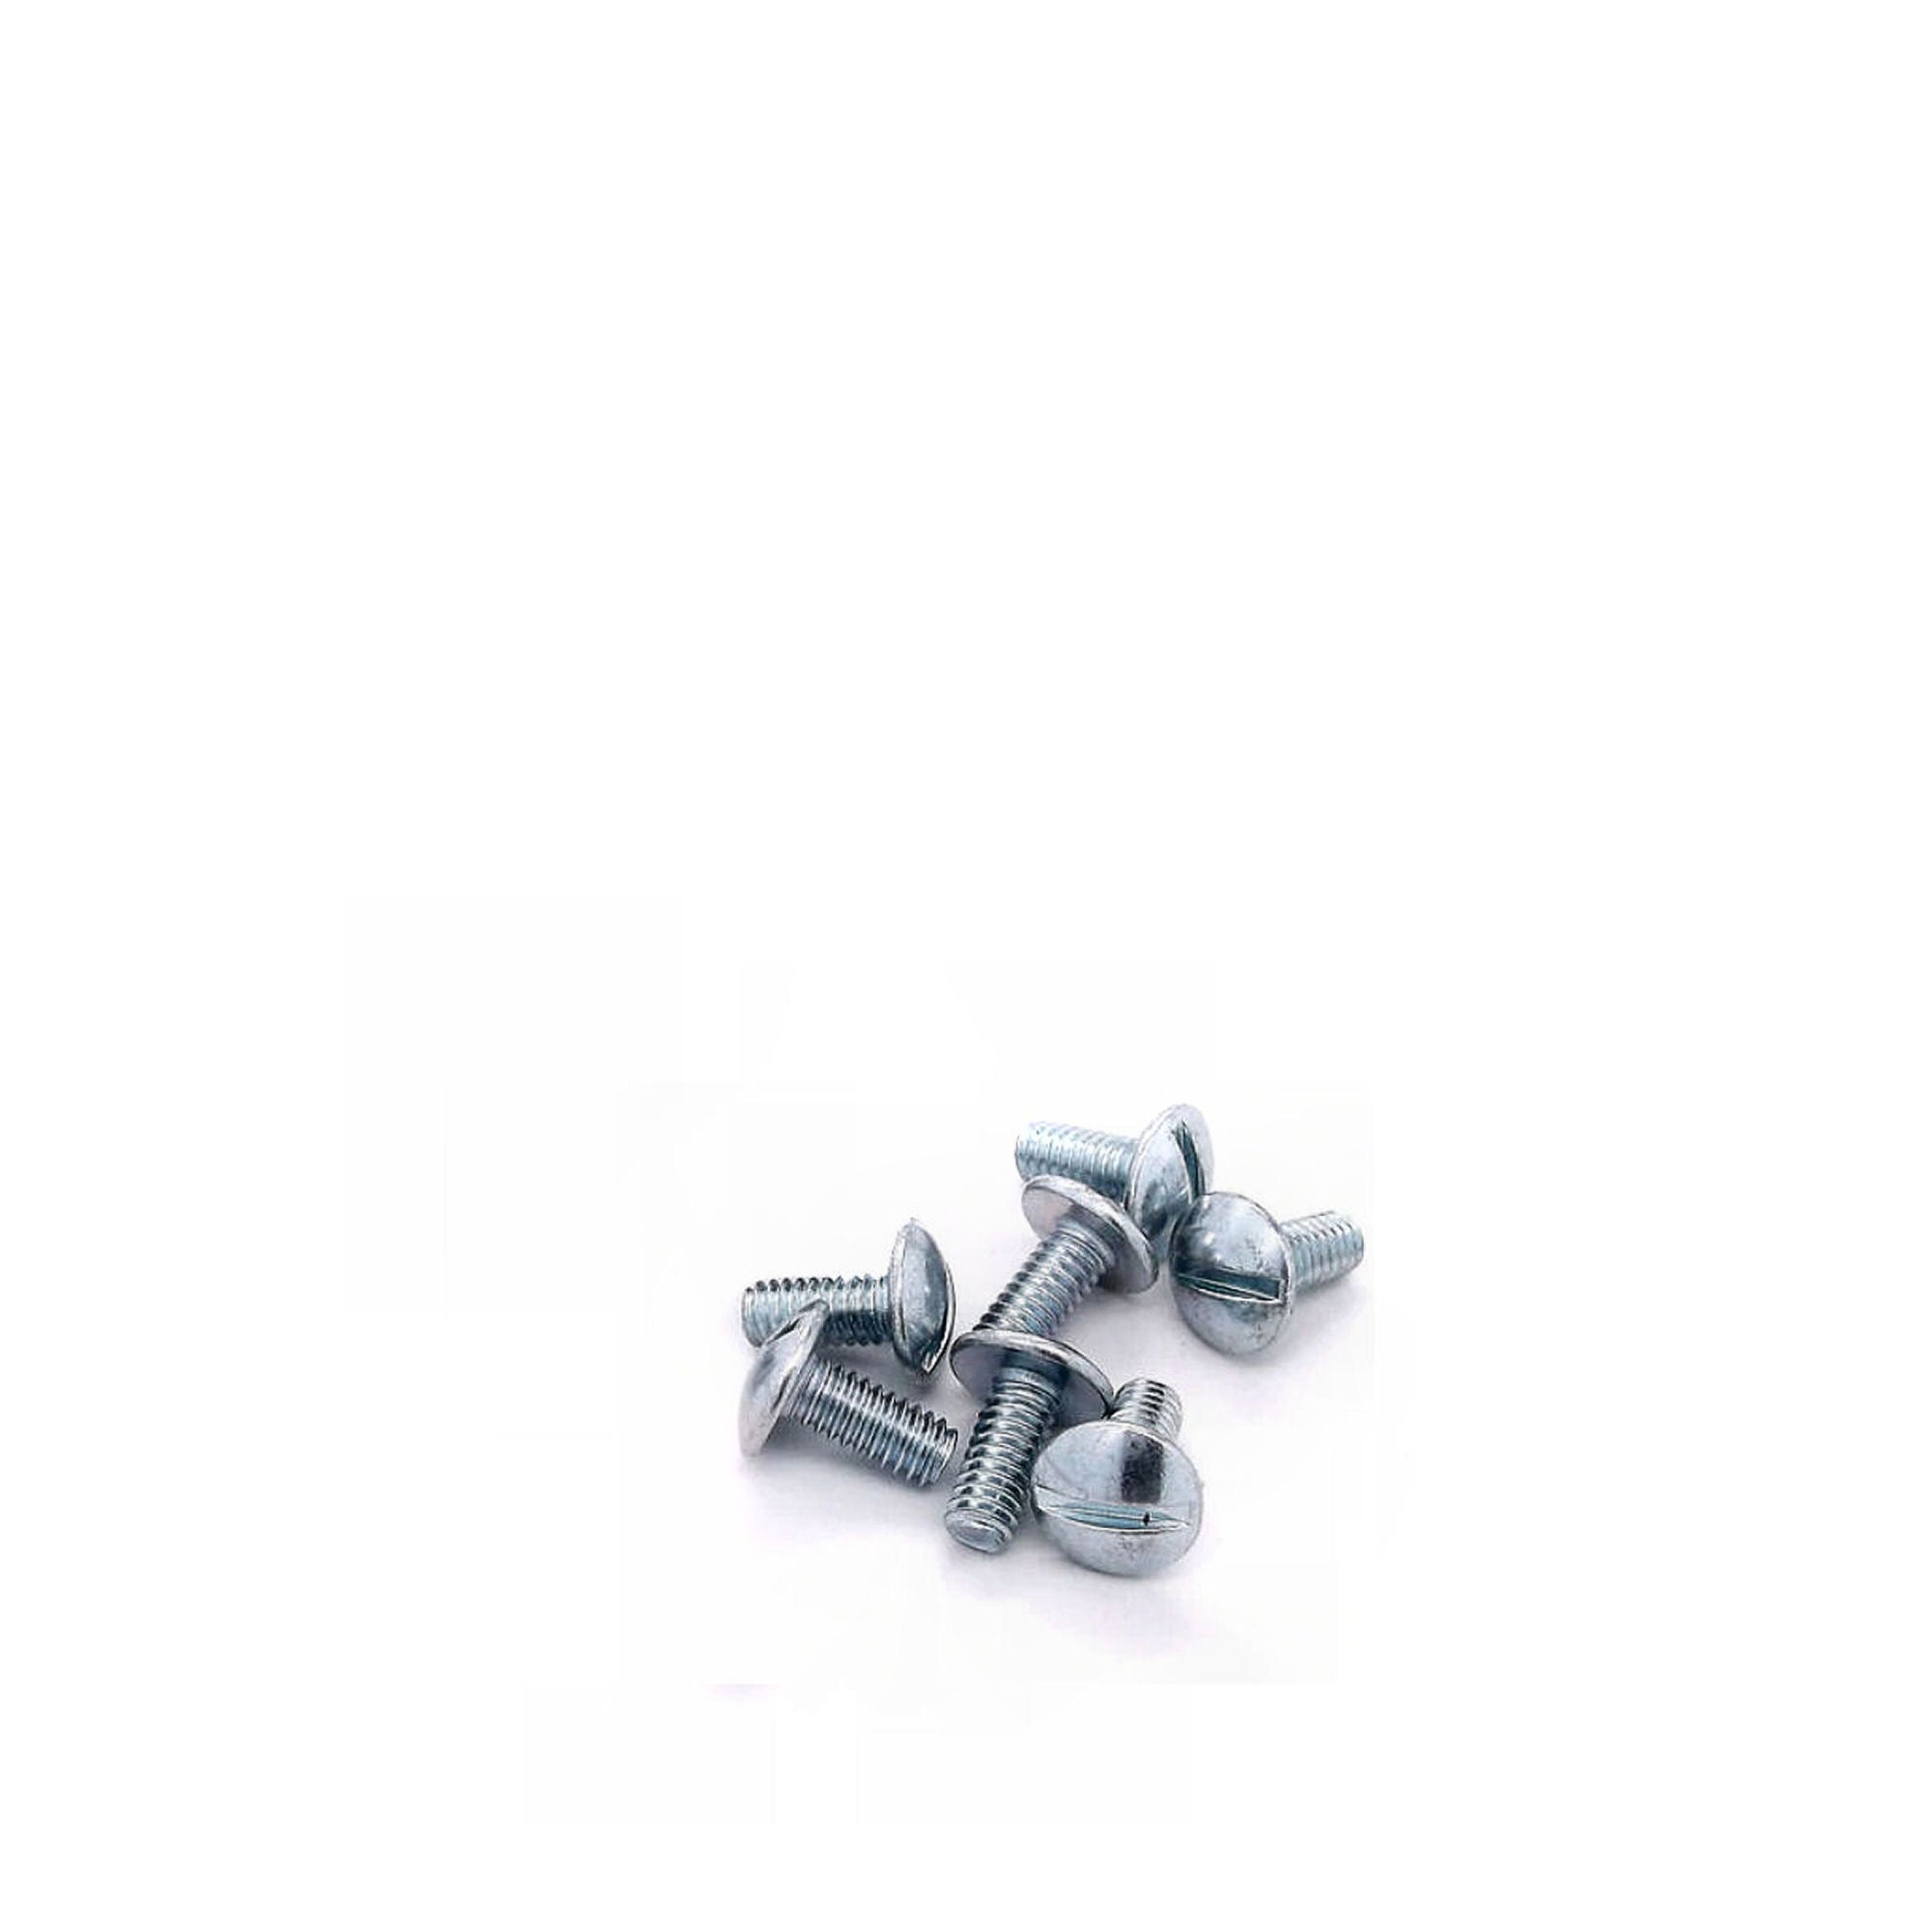 6mm Concho Screws from Identity Leathercraft